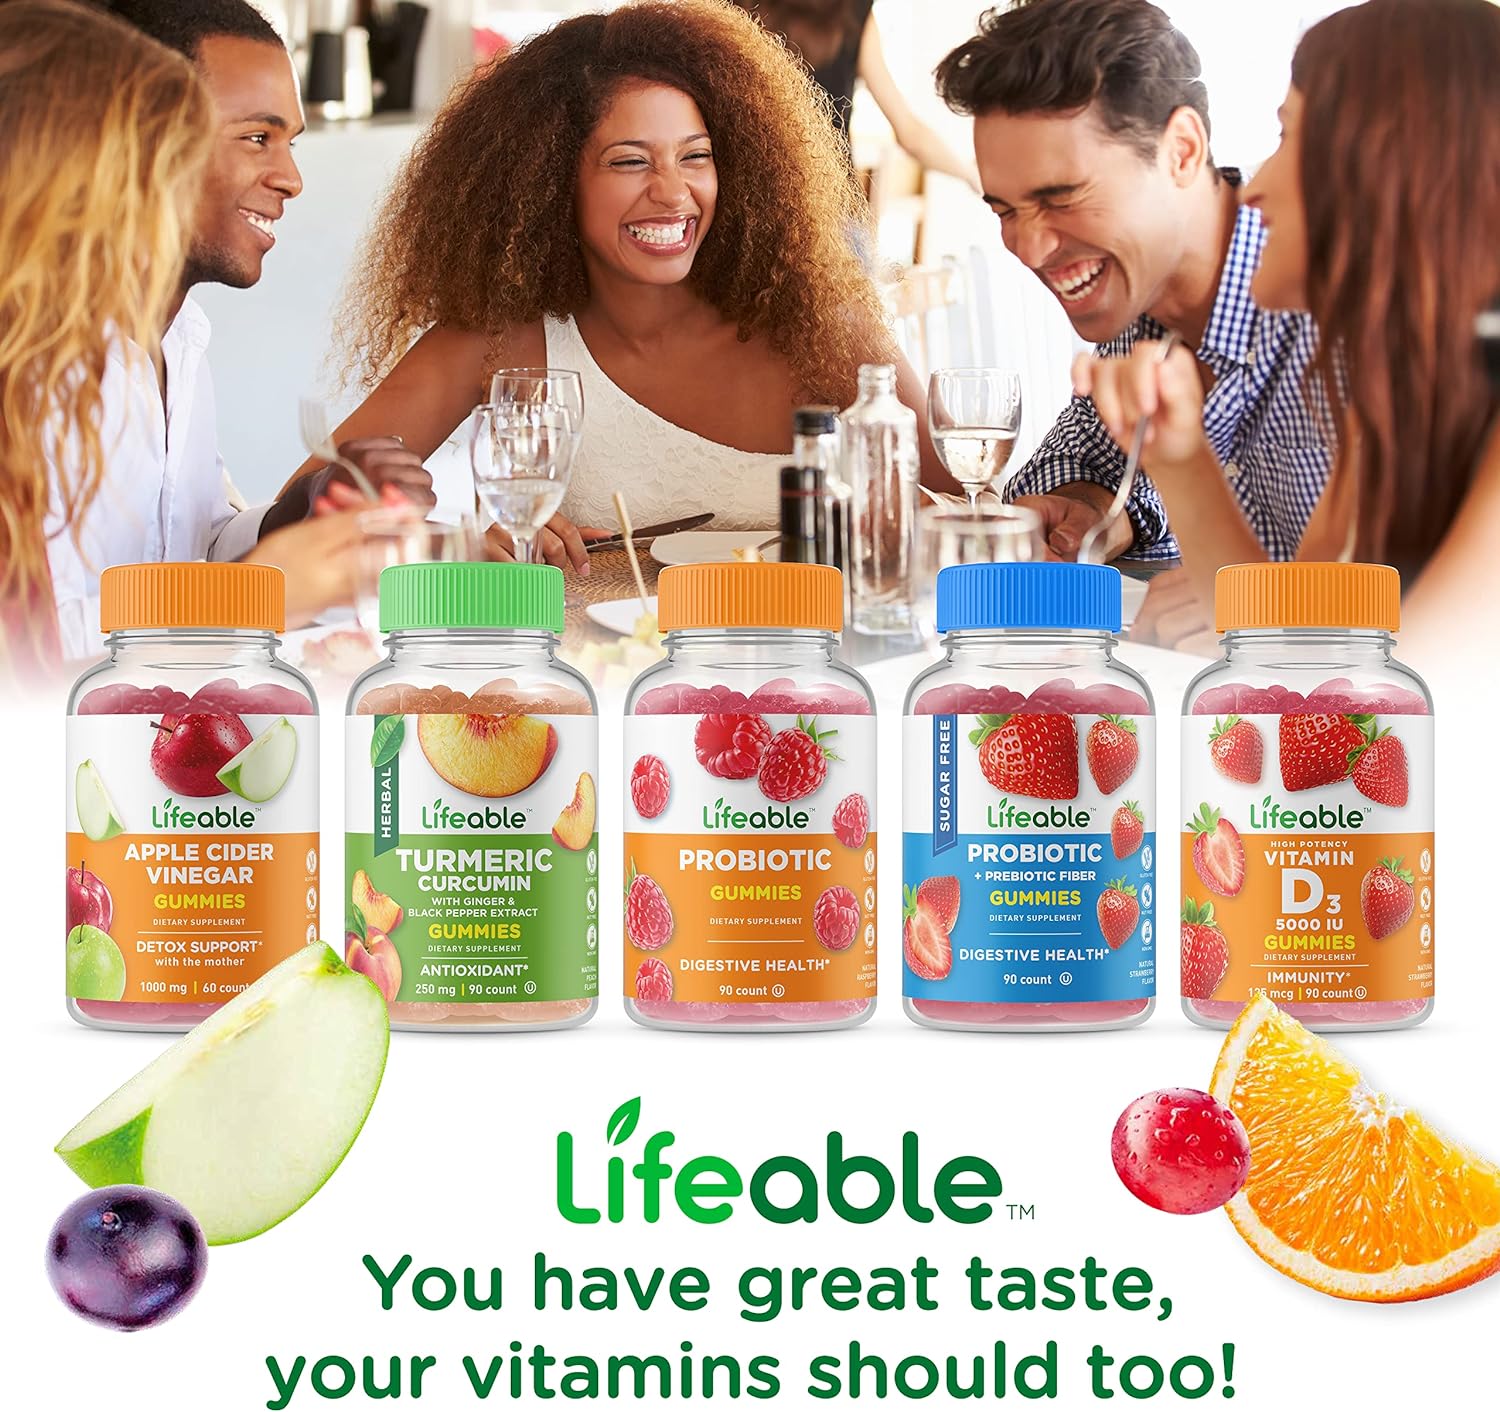 Lifeable Sugar Free Prebiotics Fiber For Adults - 4G - Great Tasting Natural Flavored Gummy Supplement - Keto Friendly - Gluten Free, Vegetarian, Gmo Free - For Gut And Digestive Health - 90 Gummies